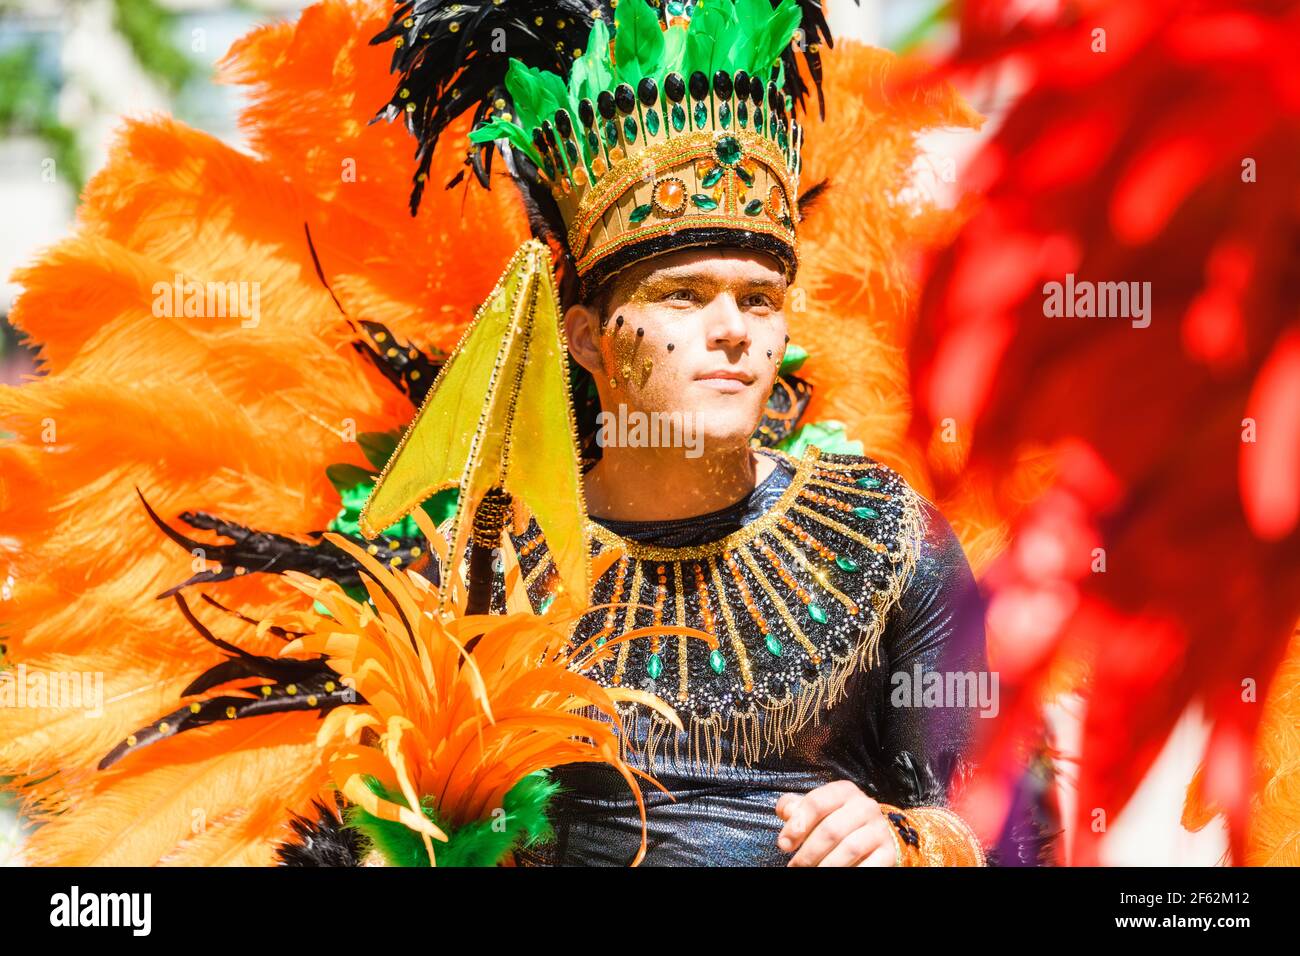 HAMMARKULLEN, SWEDEN - MAY 25, 2019: Face of a young man in the yearly carnival in Hammarkullen, Sweden Stock Photo